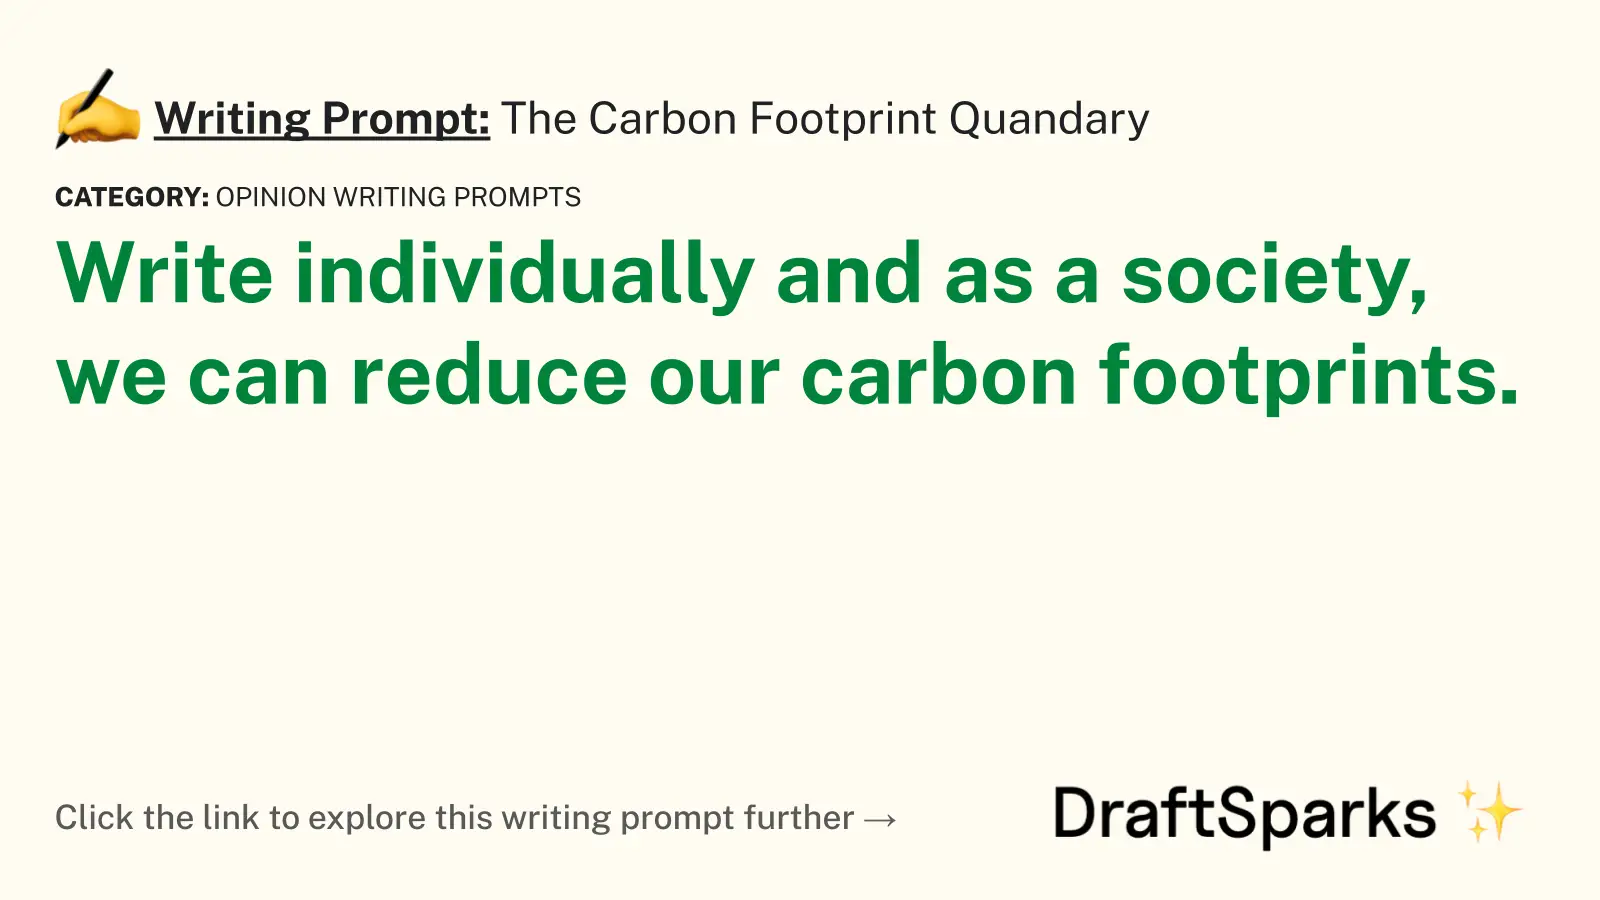 The Carbon Footprint Quandary